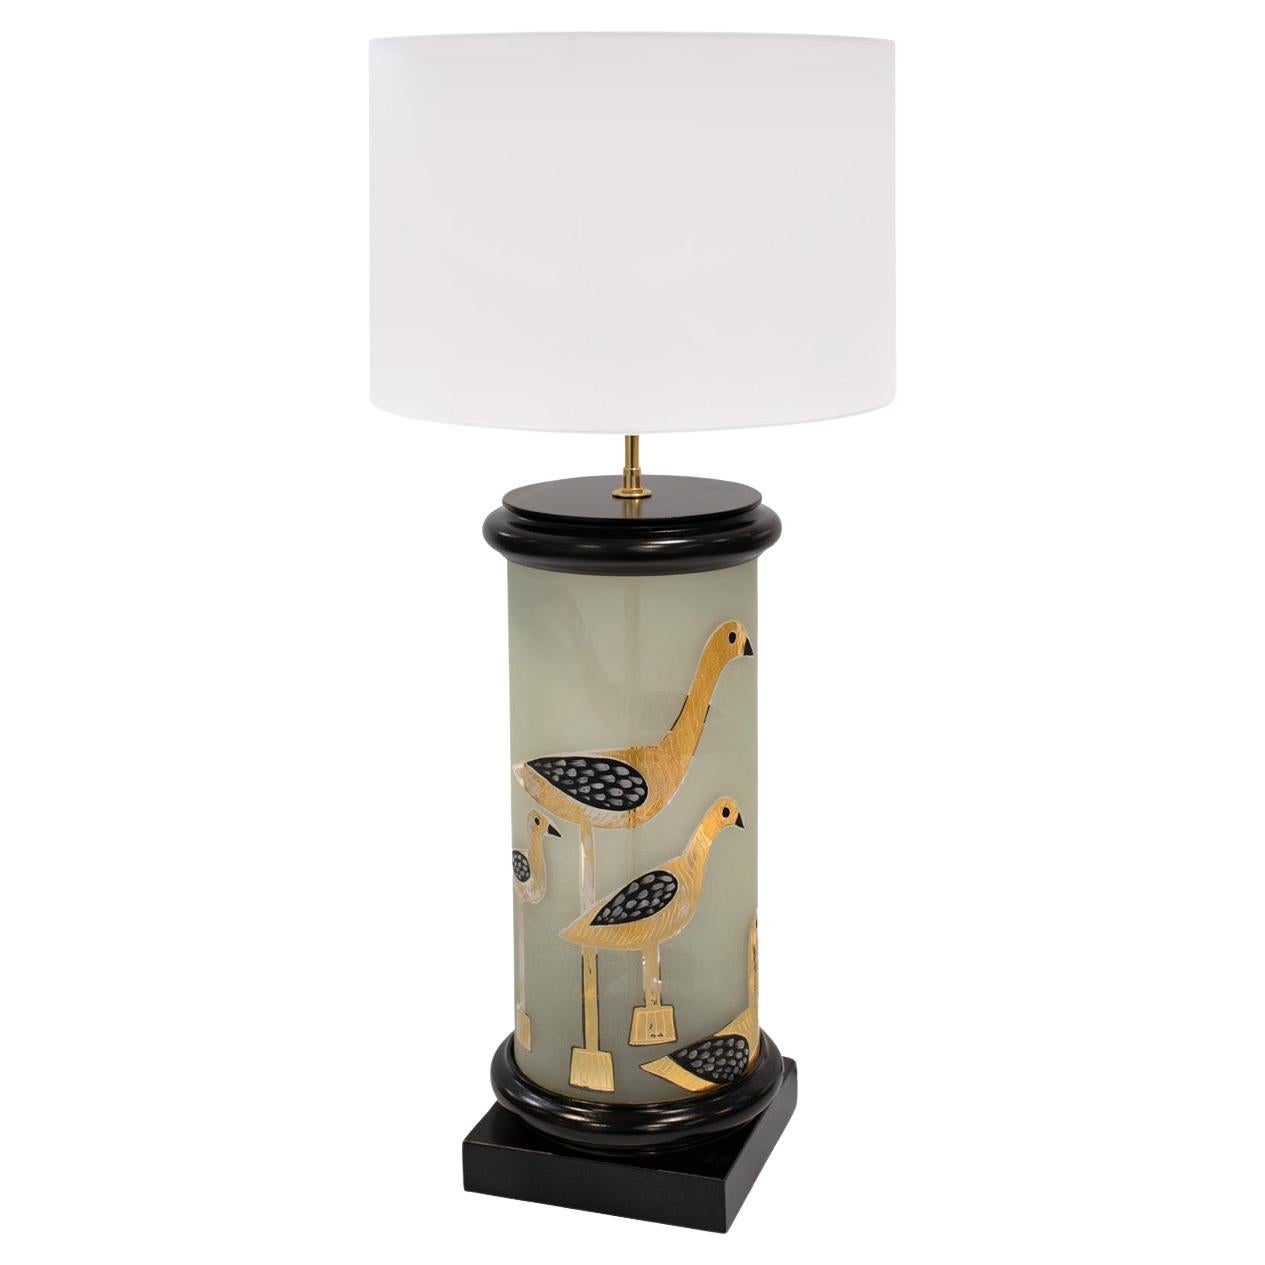 Large Artisan Table Lamp with Hand-Painted Bird Motif 1960s